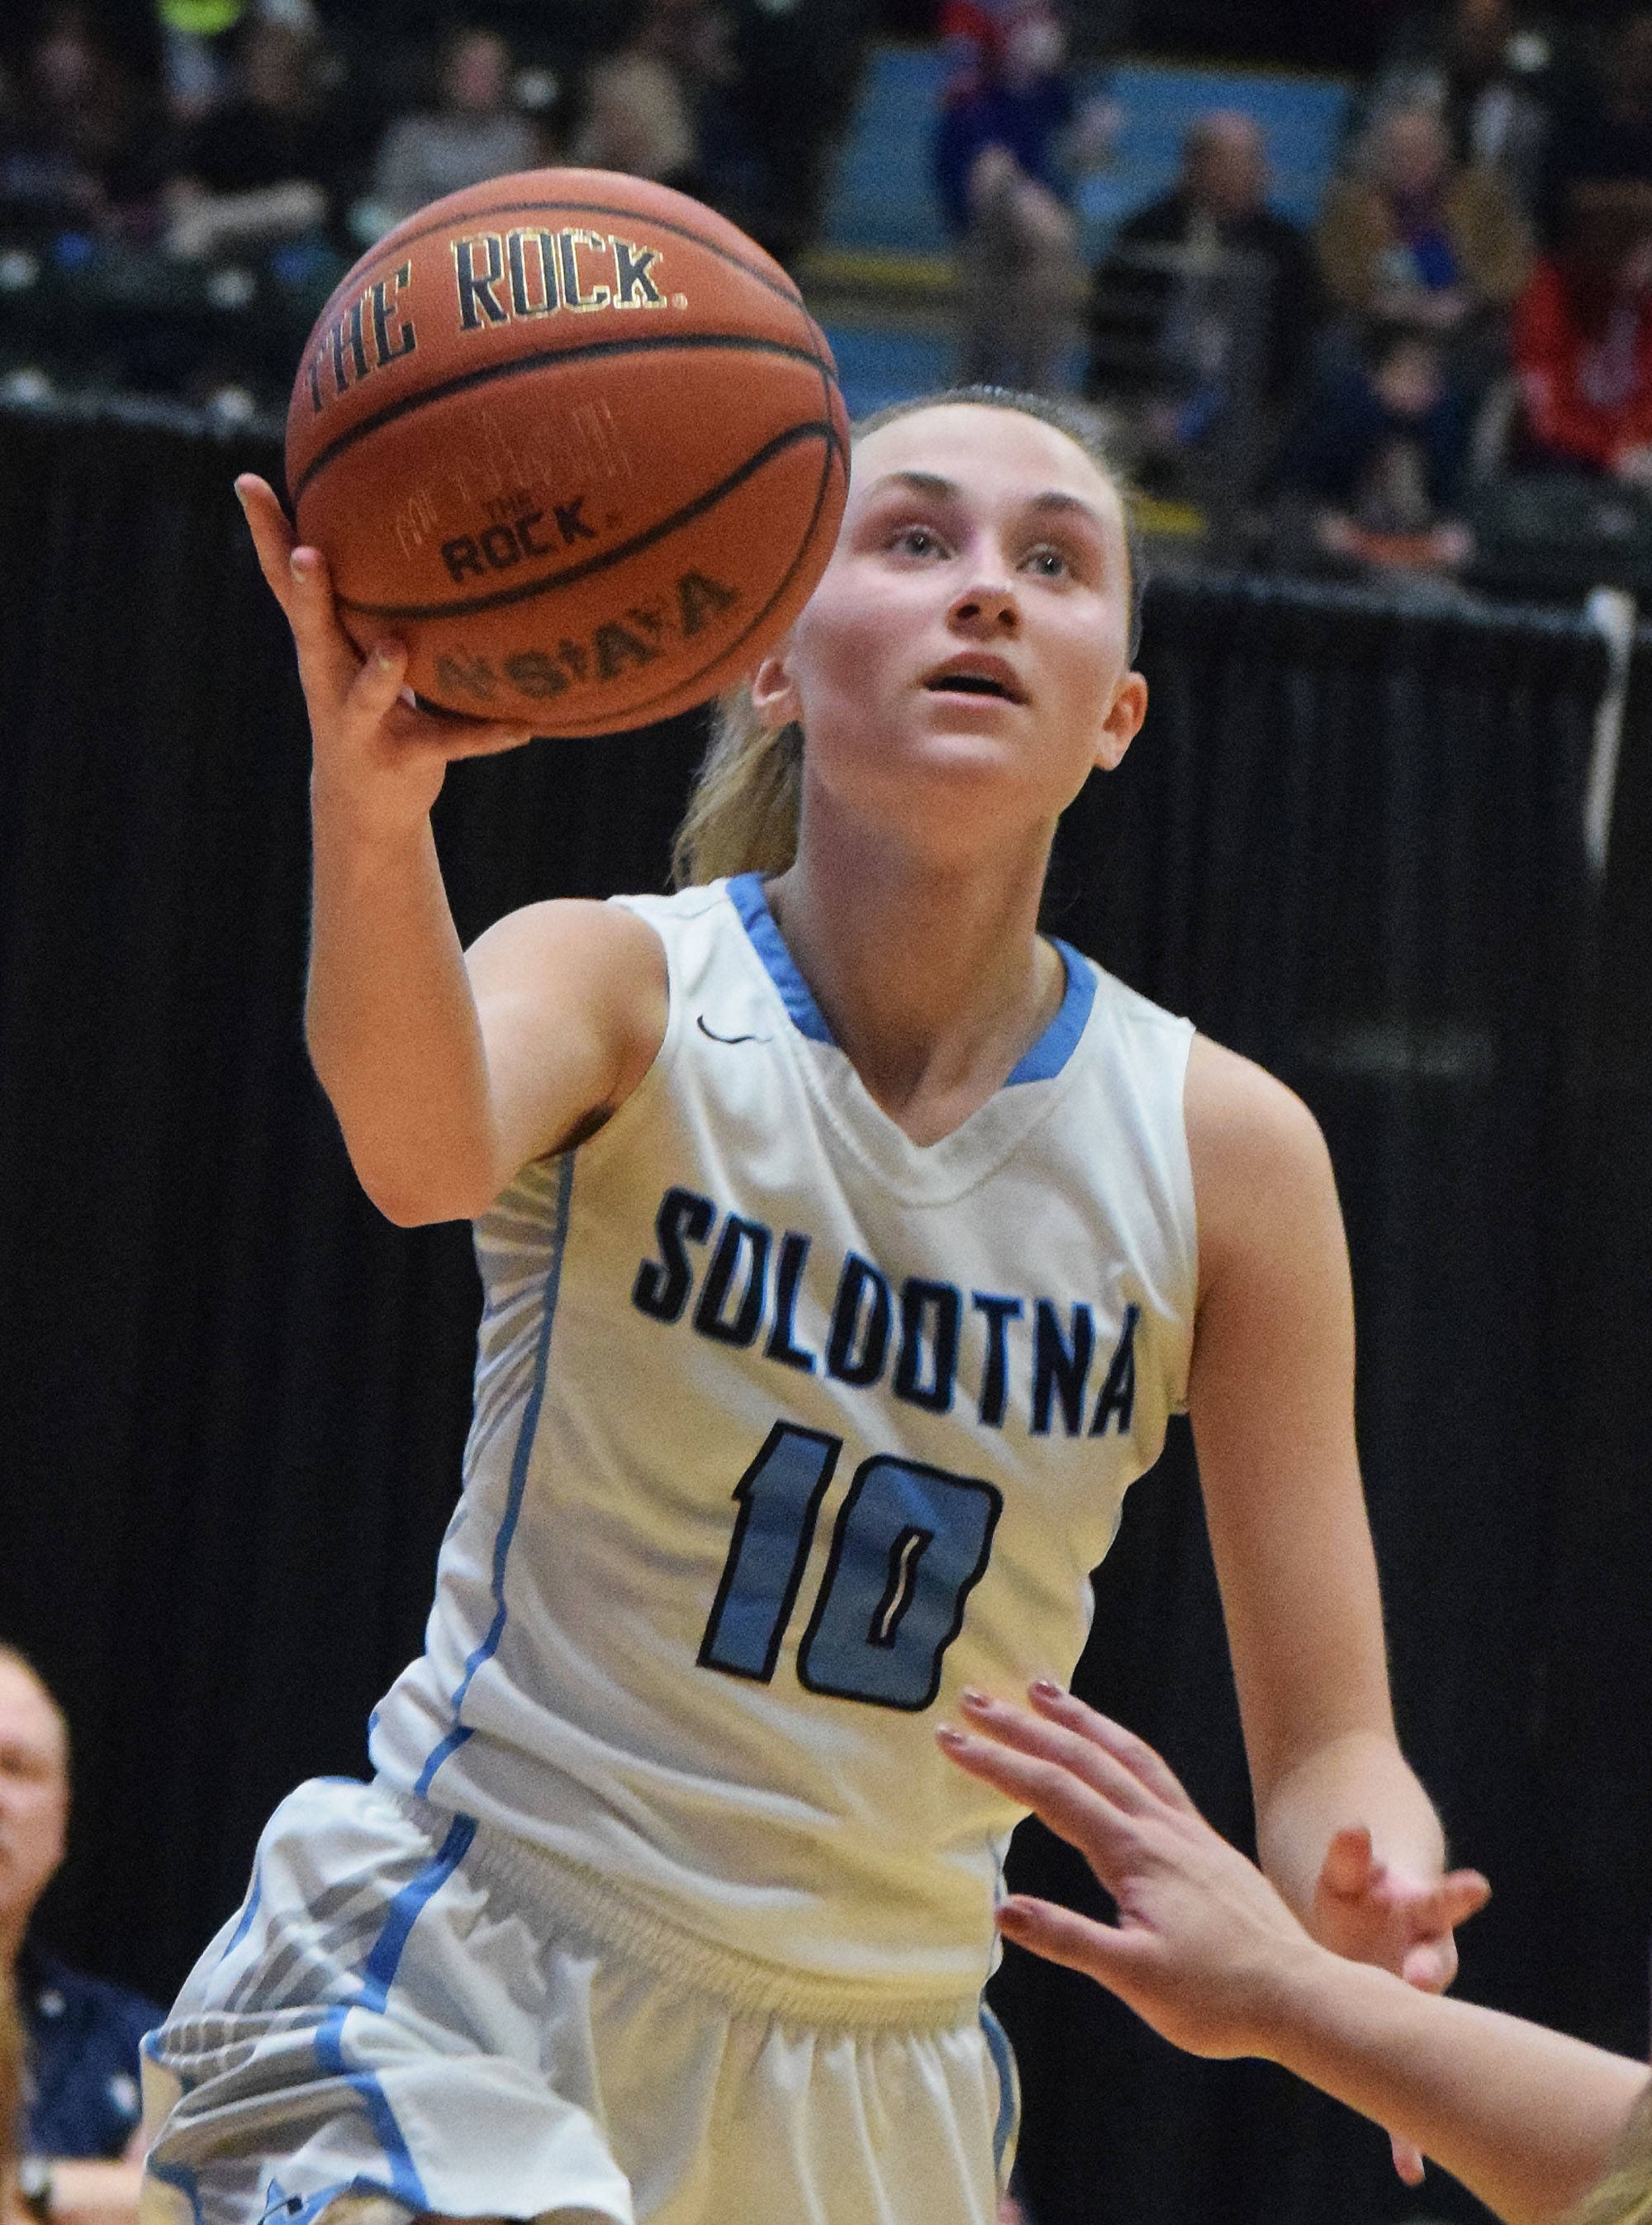 Soldotna’s Aliann Schmidt jumps up for a shot attempt Thursday, Mar. 21, 2019, against West Anchorage at the Class 4A state championship tournament at the Alaska Airlines Center in Anchorage. (Photo by Joey Klecka/Peninsula Clarion)